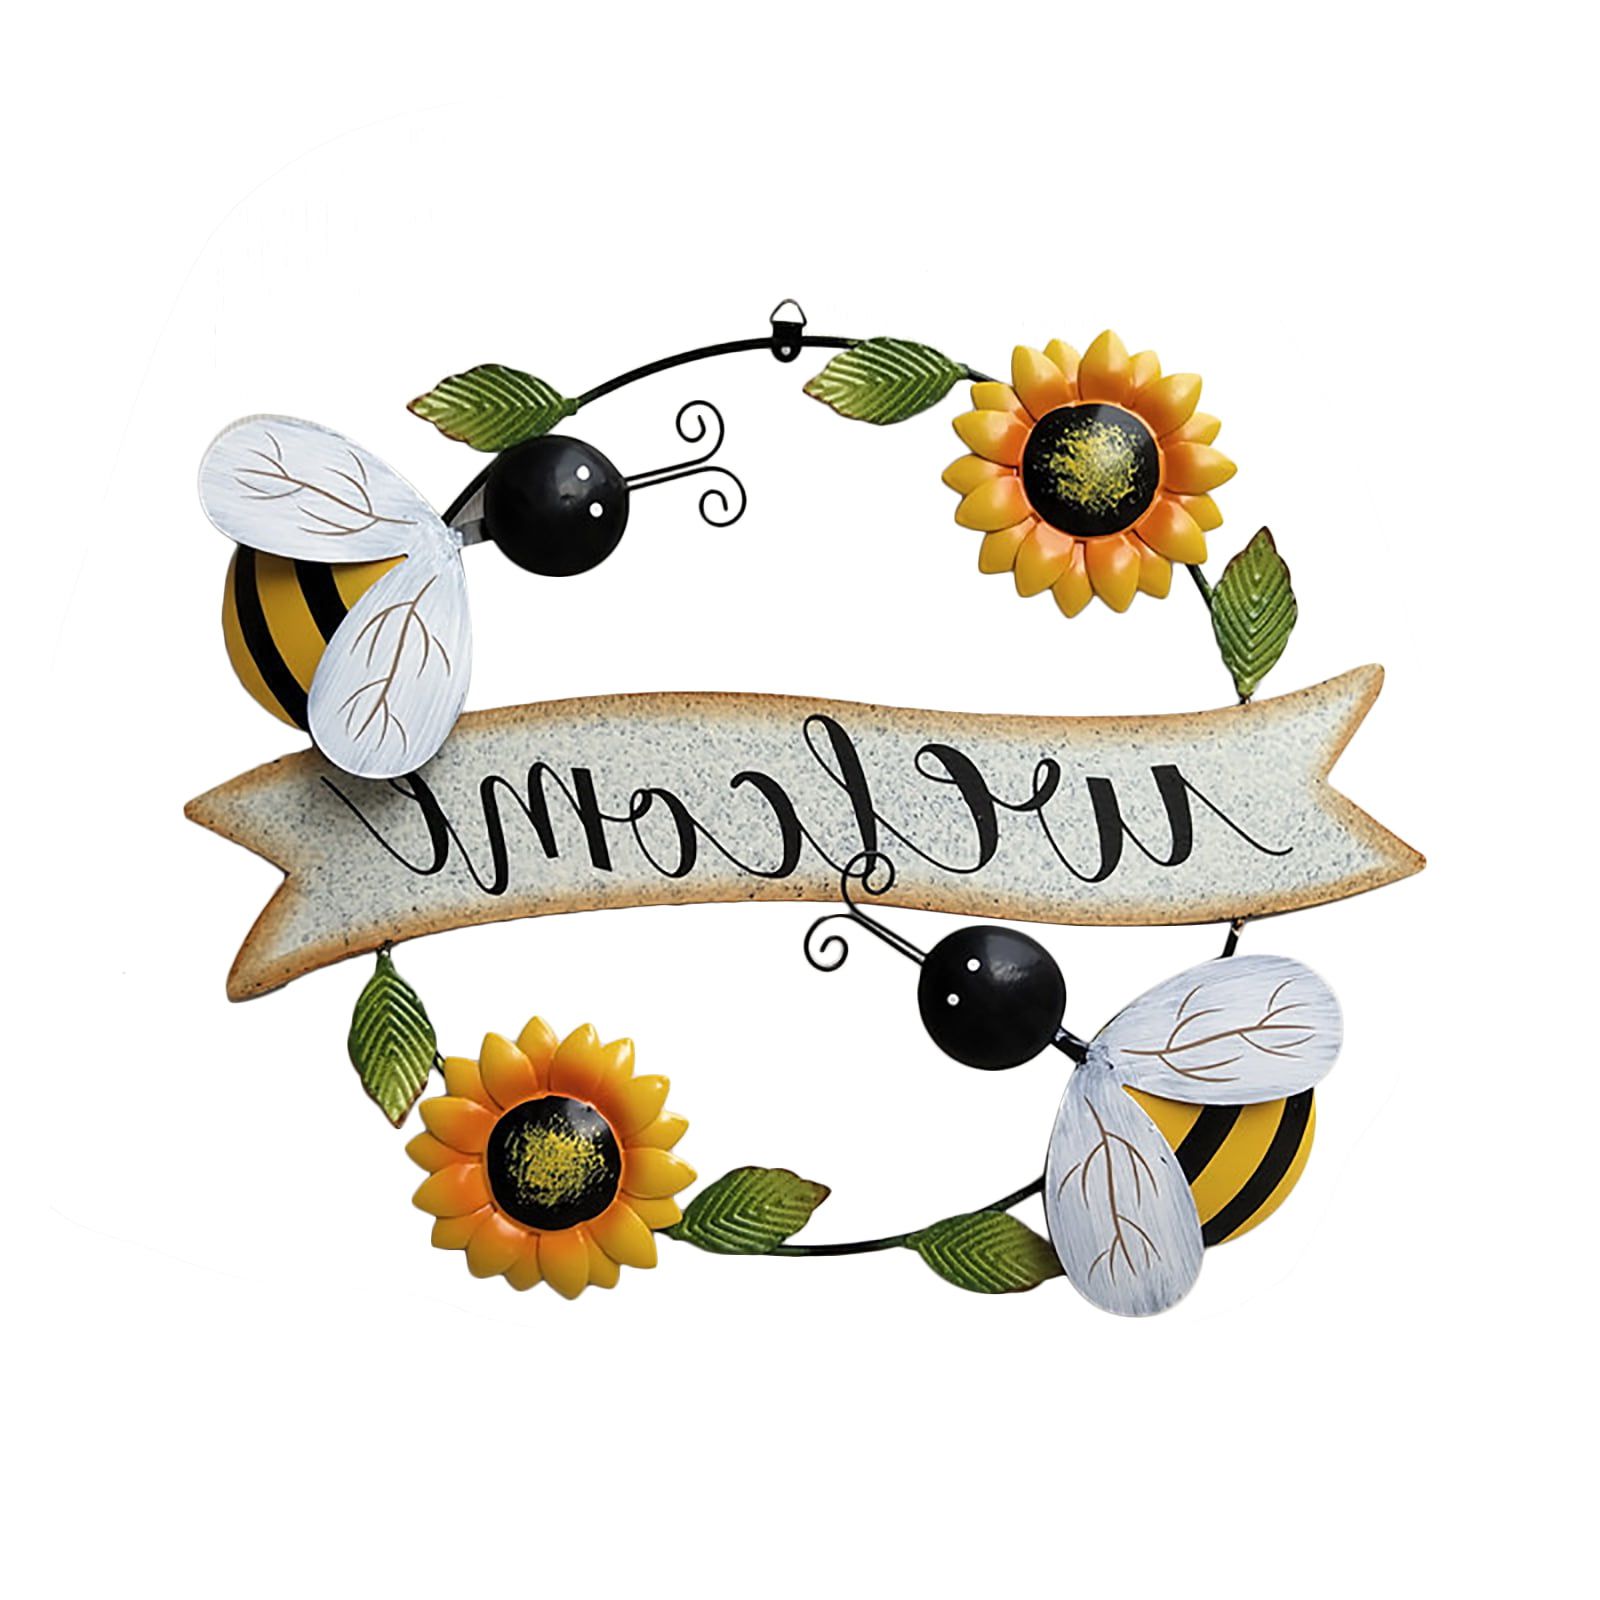 Sunflower Welcome Sign Decorative Vintage Metal Wall Hanging Home Garden  Decor – Welcome Plaque For Front Door, Garden Themed Sunflower & Butterfly  – Walmart Within Most Recently Released Vintage Metal Welcome Sign Wall Art (Photo 7 of 15)